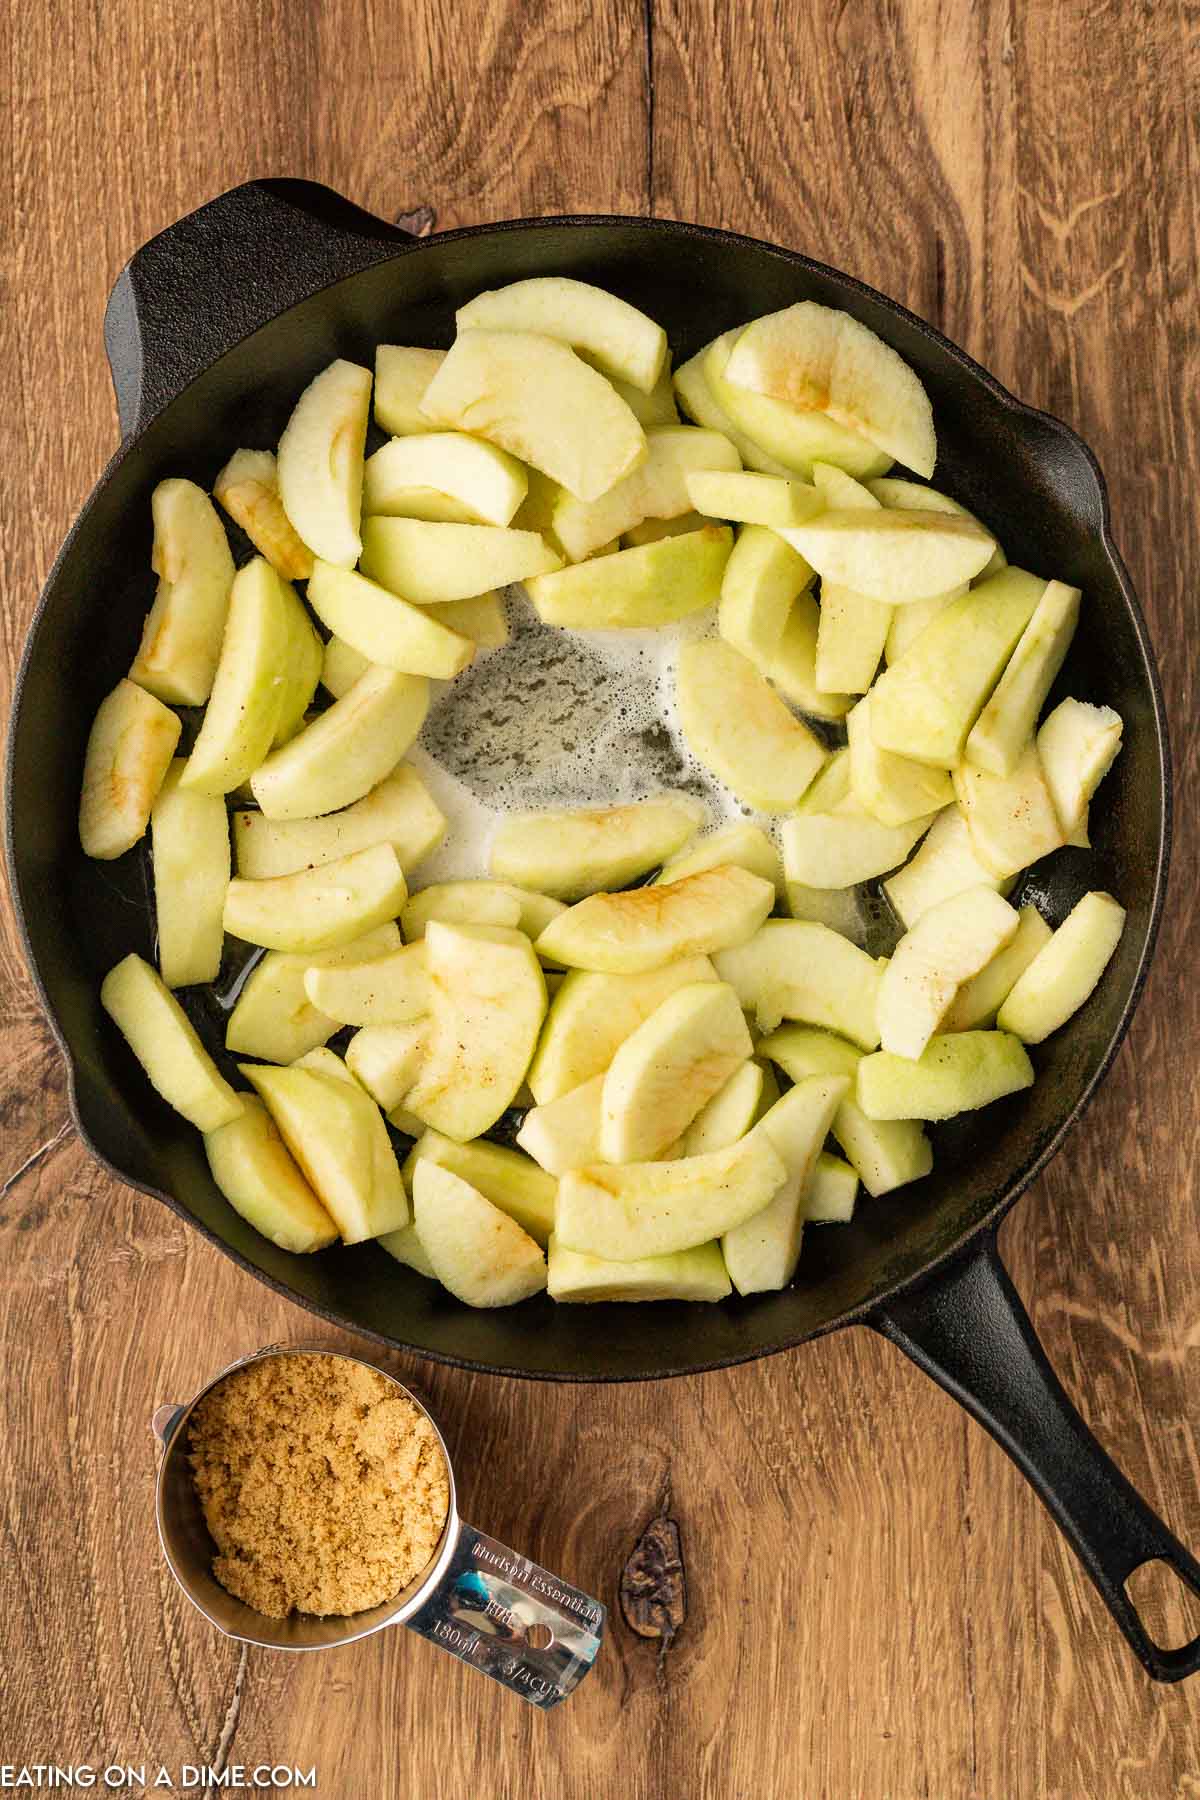 Cooking slice apples in melted butter in a cast iron skillet